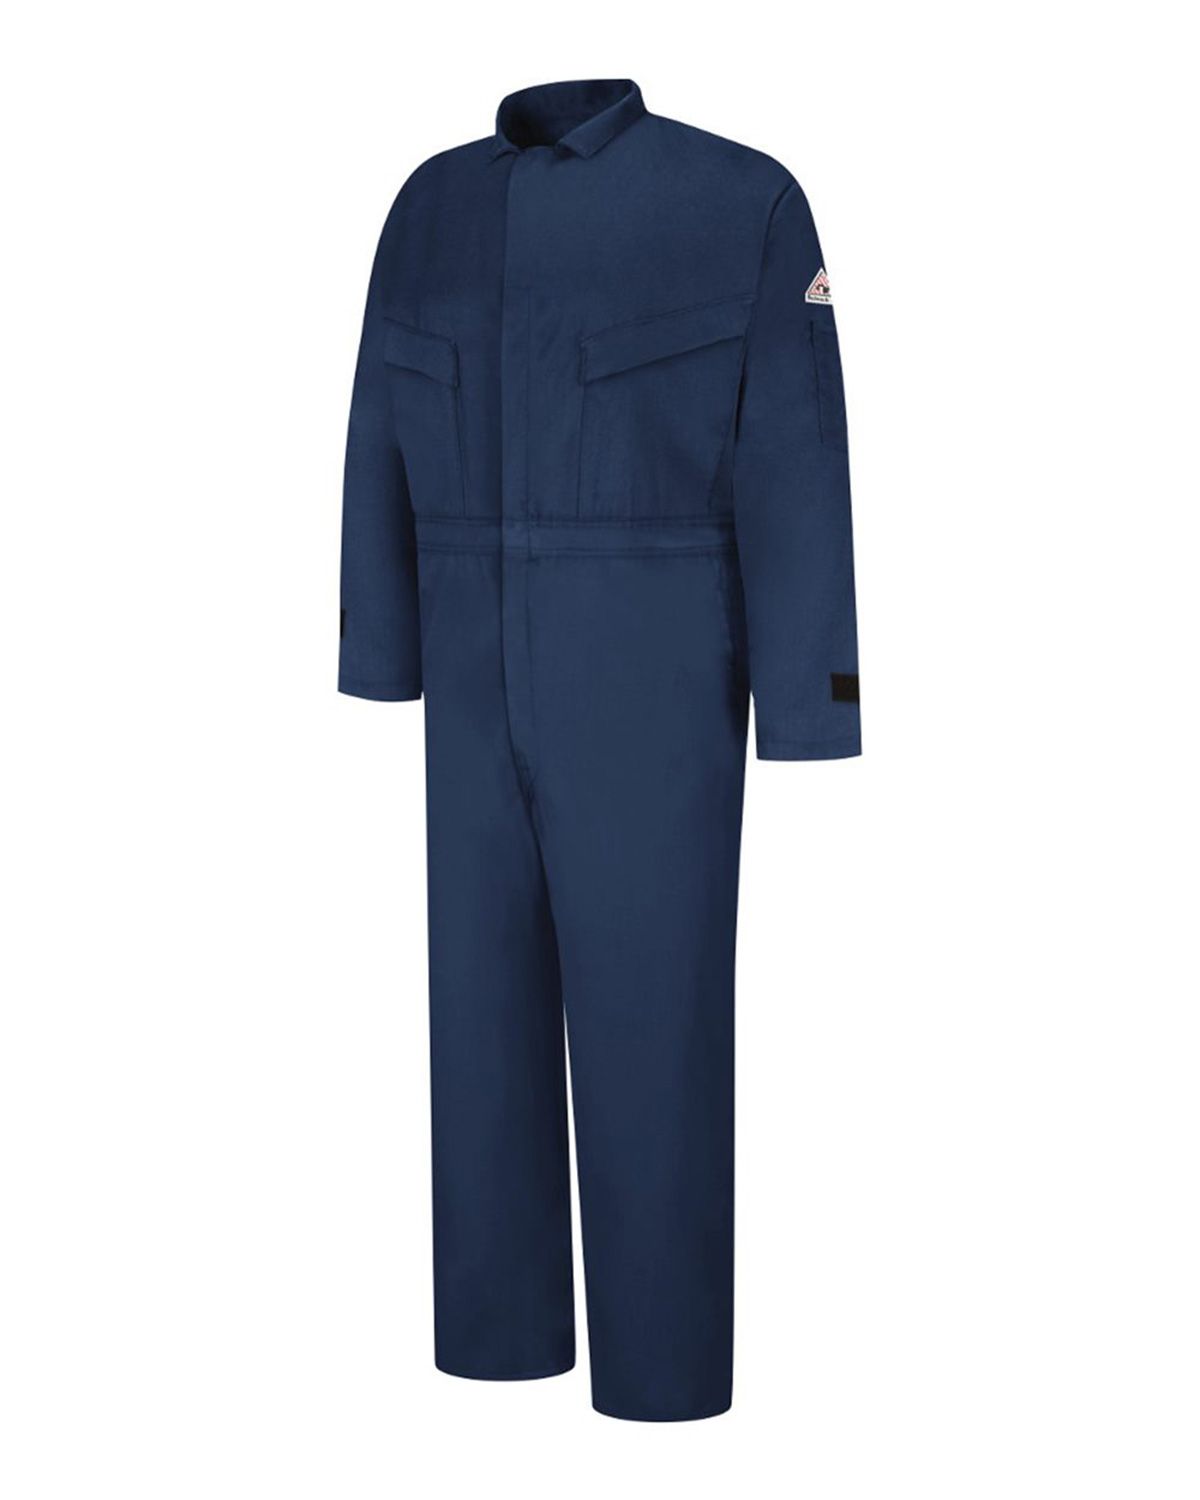 Bulwark CLZ4L EXCEL FR ComforTouch Deluxe Coverall Long Sizes